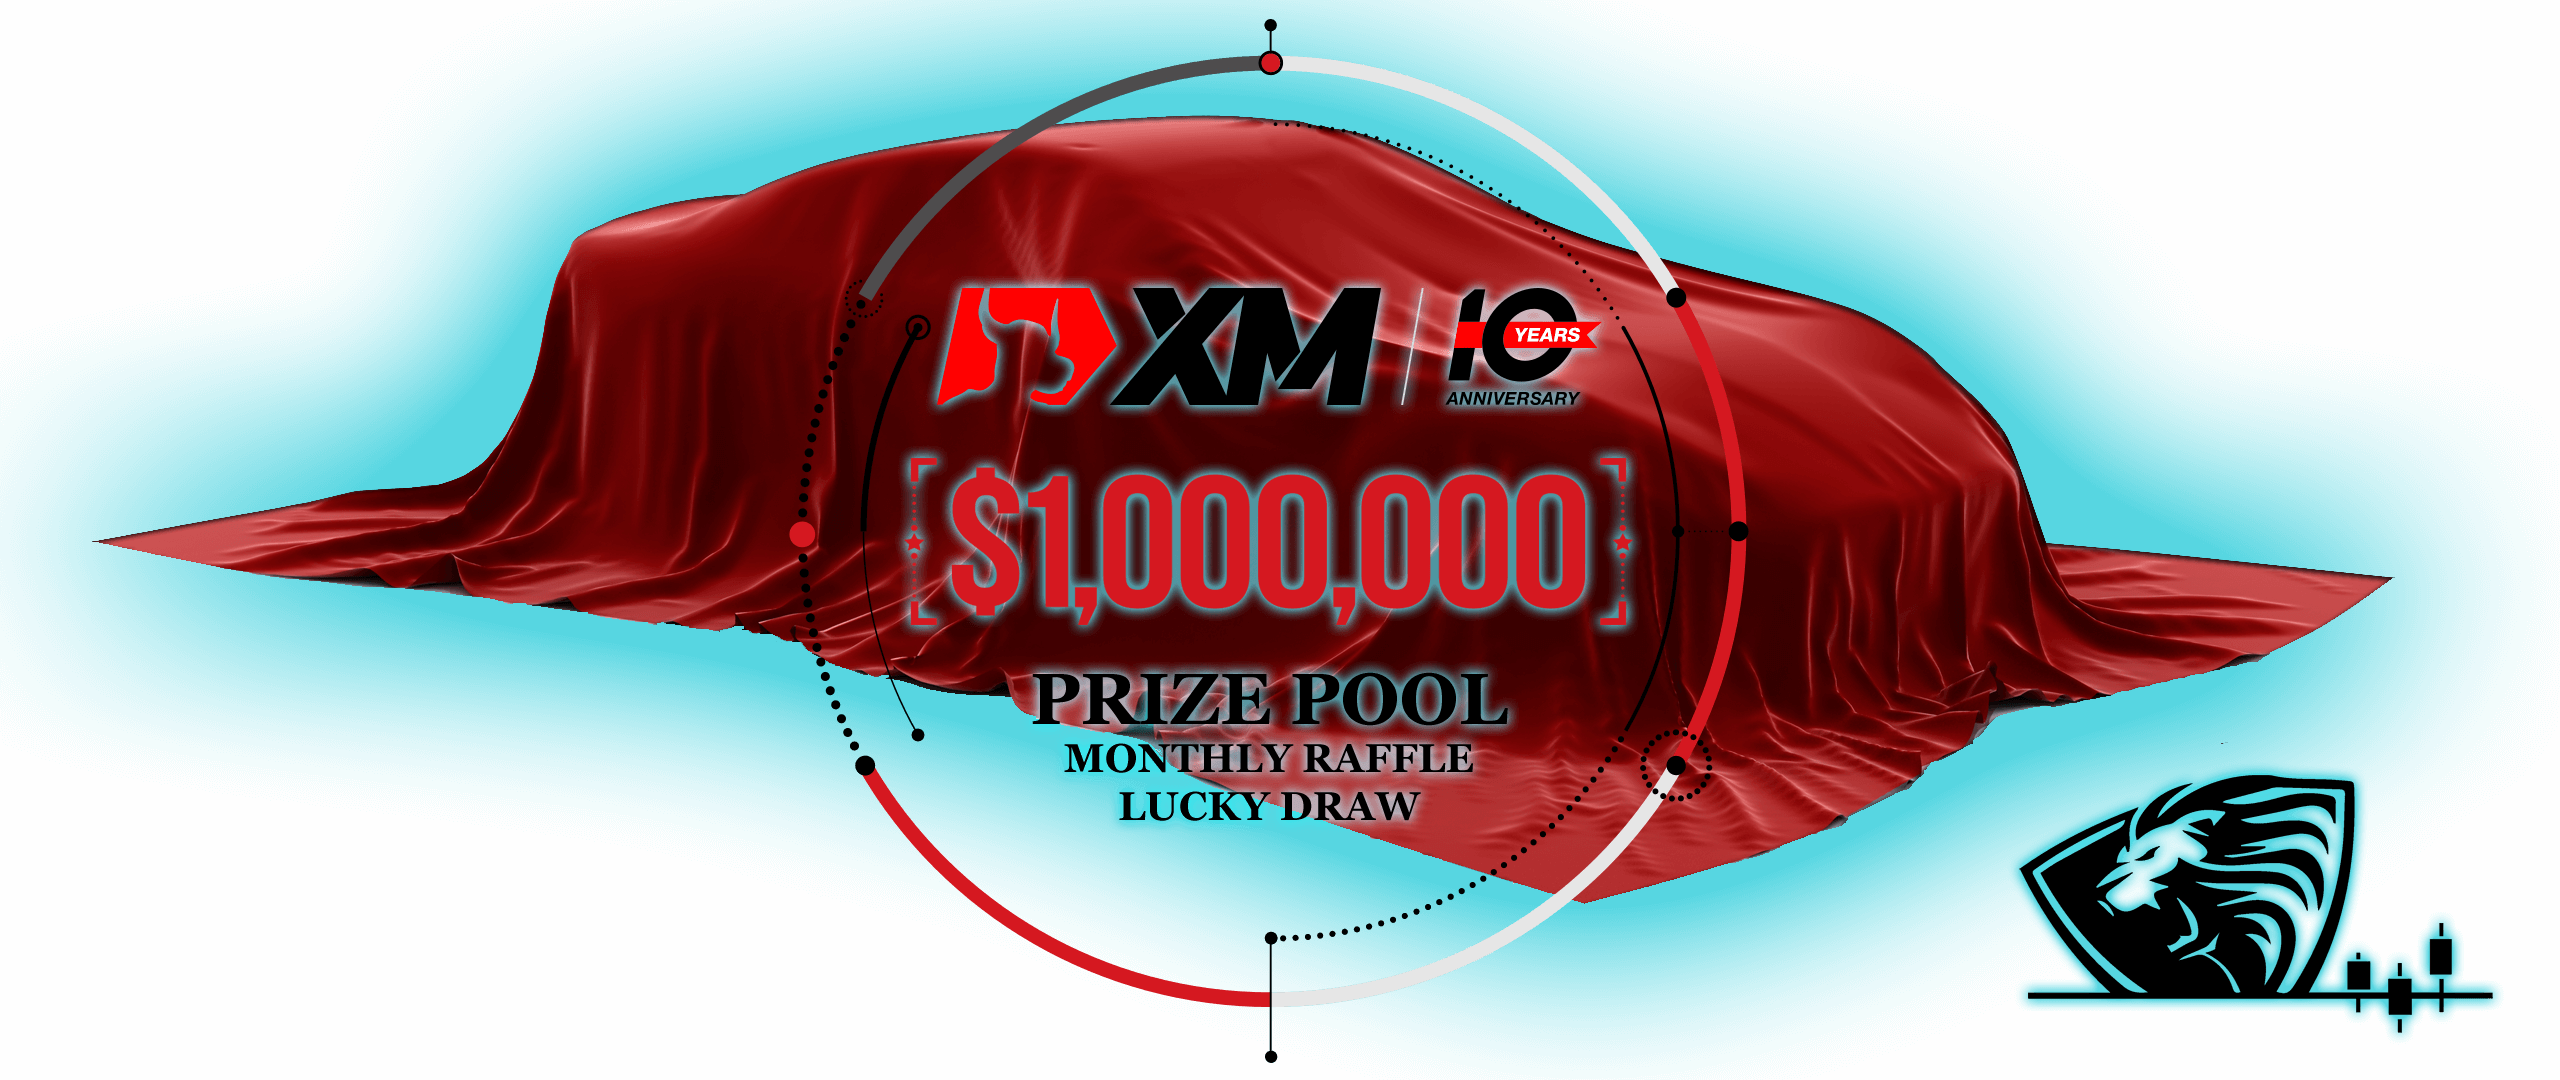 XM-Promotion-10-Years-Anniversary-Traders-Lucky-Draw-Trading-Competition